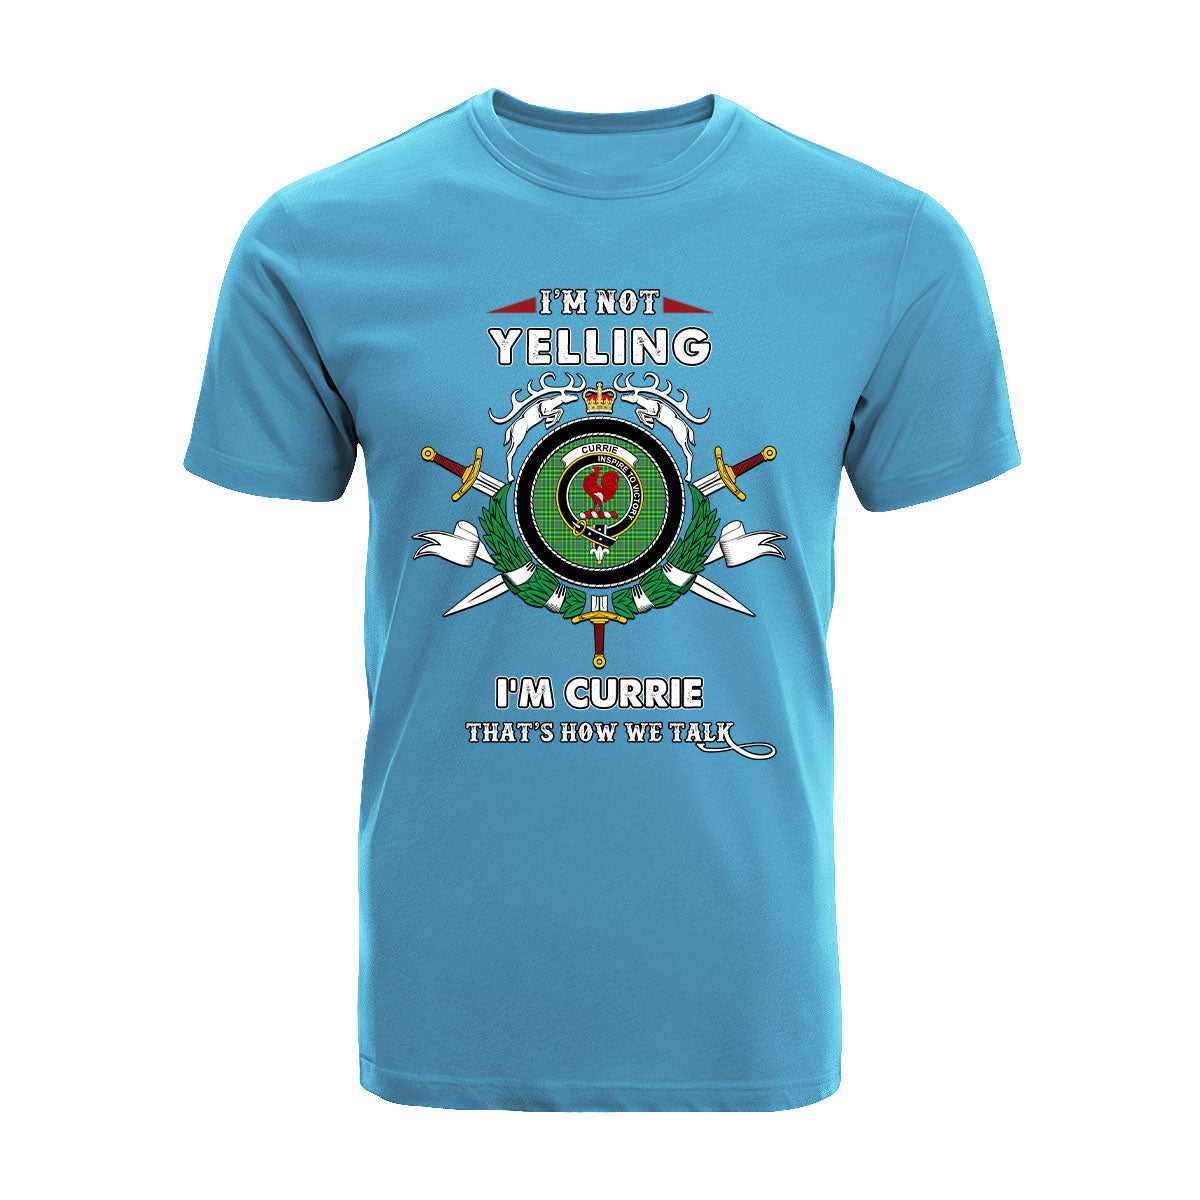 Currie Tartan Crest T-shirt - I'm not yelling style